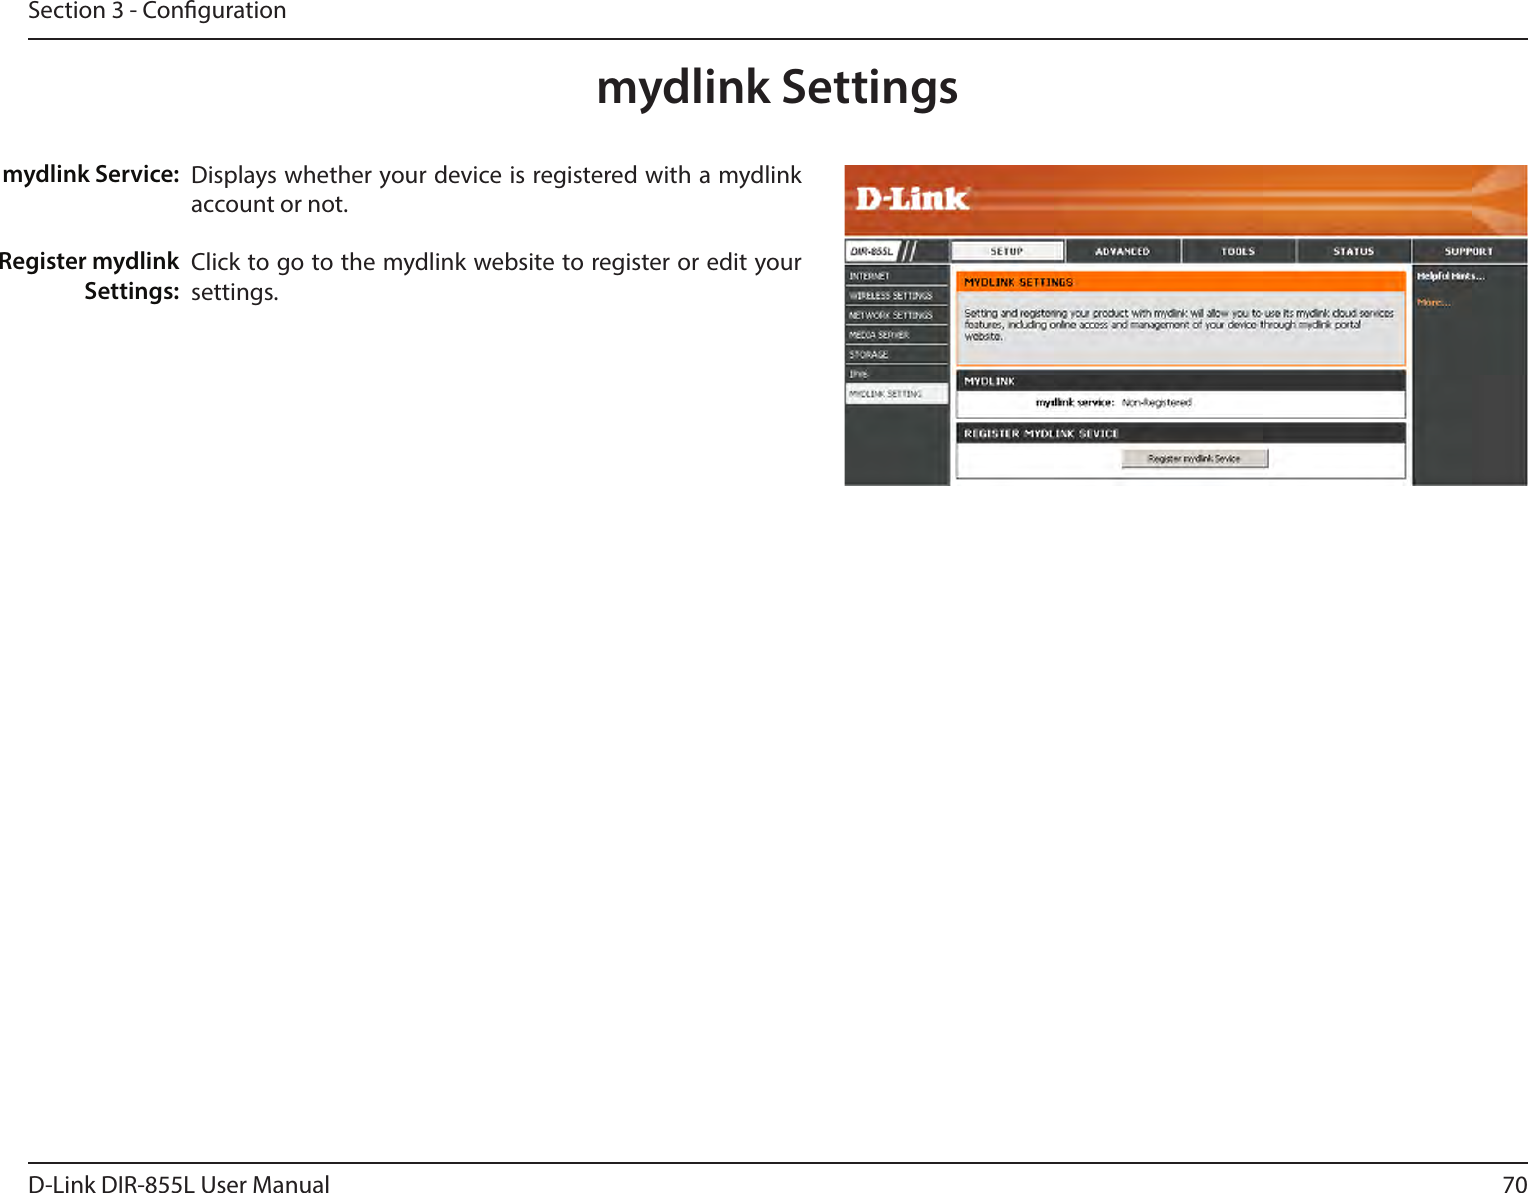 70D-Link DIR-855L User ManualSection 3 - Congurationmydlink SettingsDisplays whether your device is registered with a mydlink account or not.Click to go to the mydlink website to register or edit your settings.mydlink Service:Register mydlink Settings: